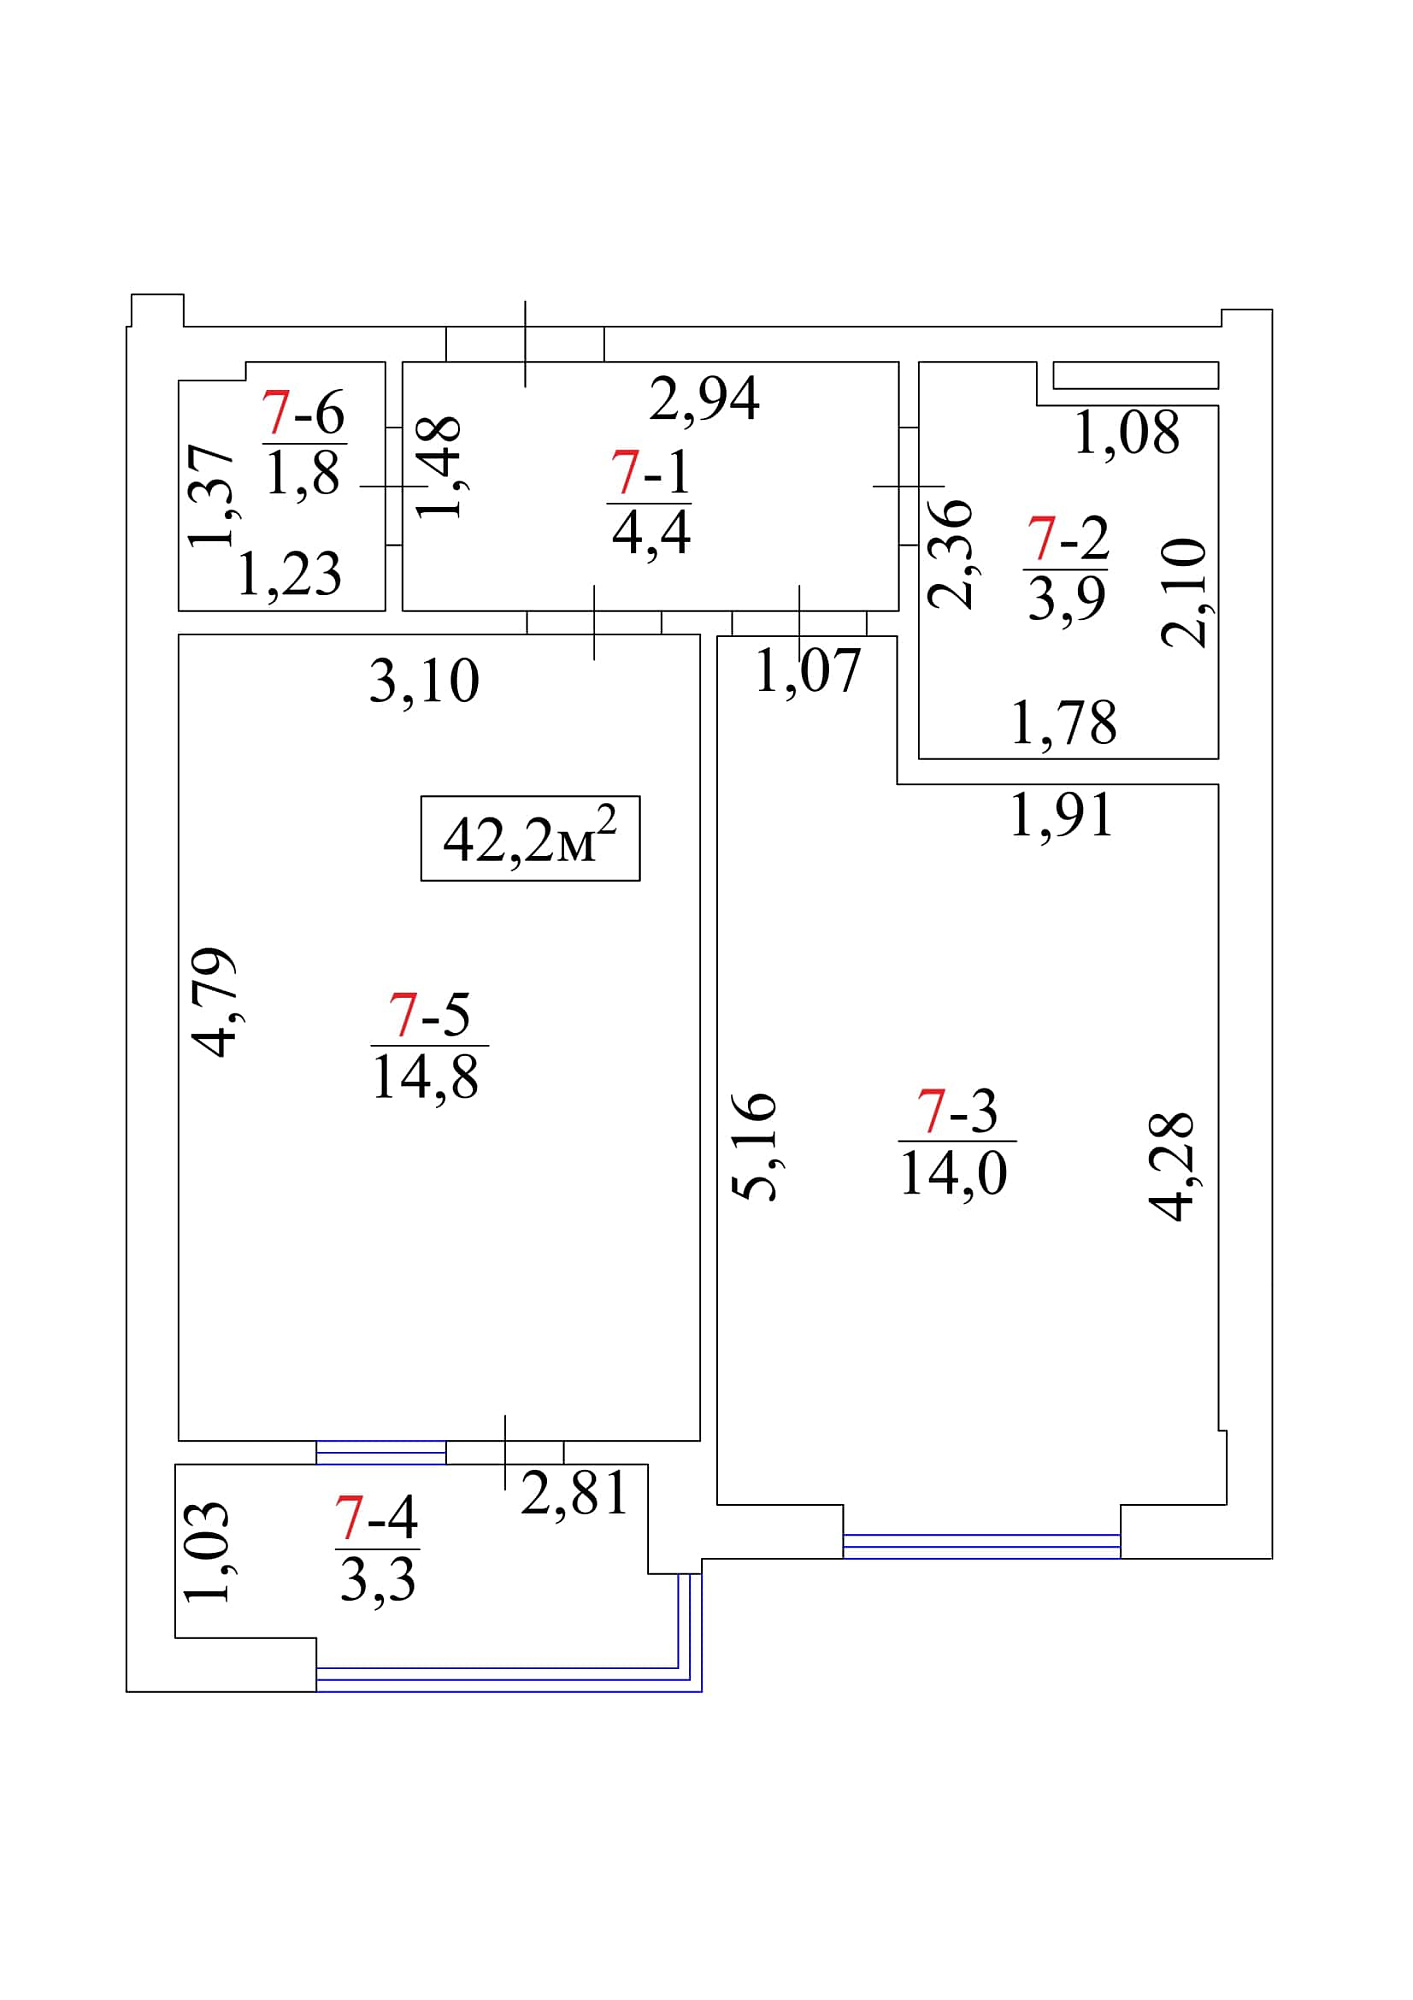 Planning 1-rm flats area 42.2m2, AB-01-02/00009.